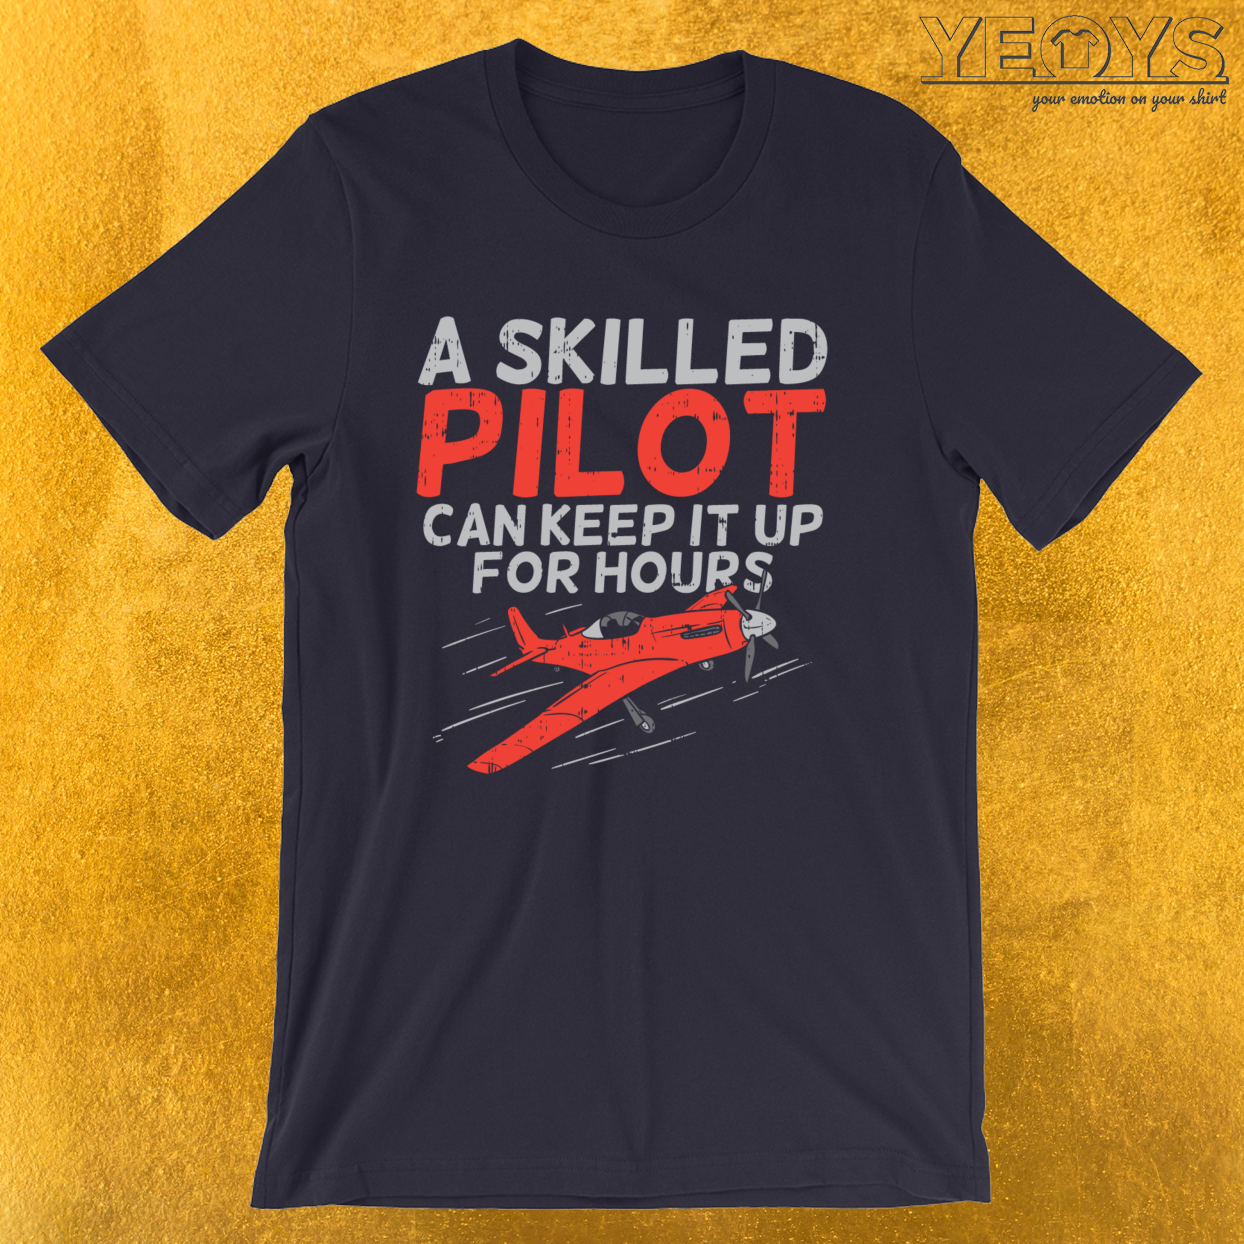 A Skilled Pilot Can Keep It Up For Hours – Funny Aviation Tee